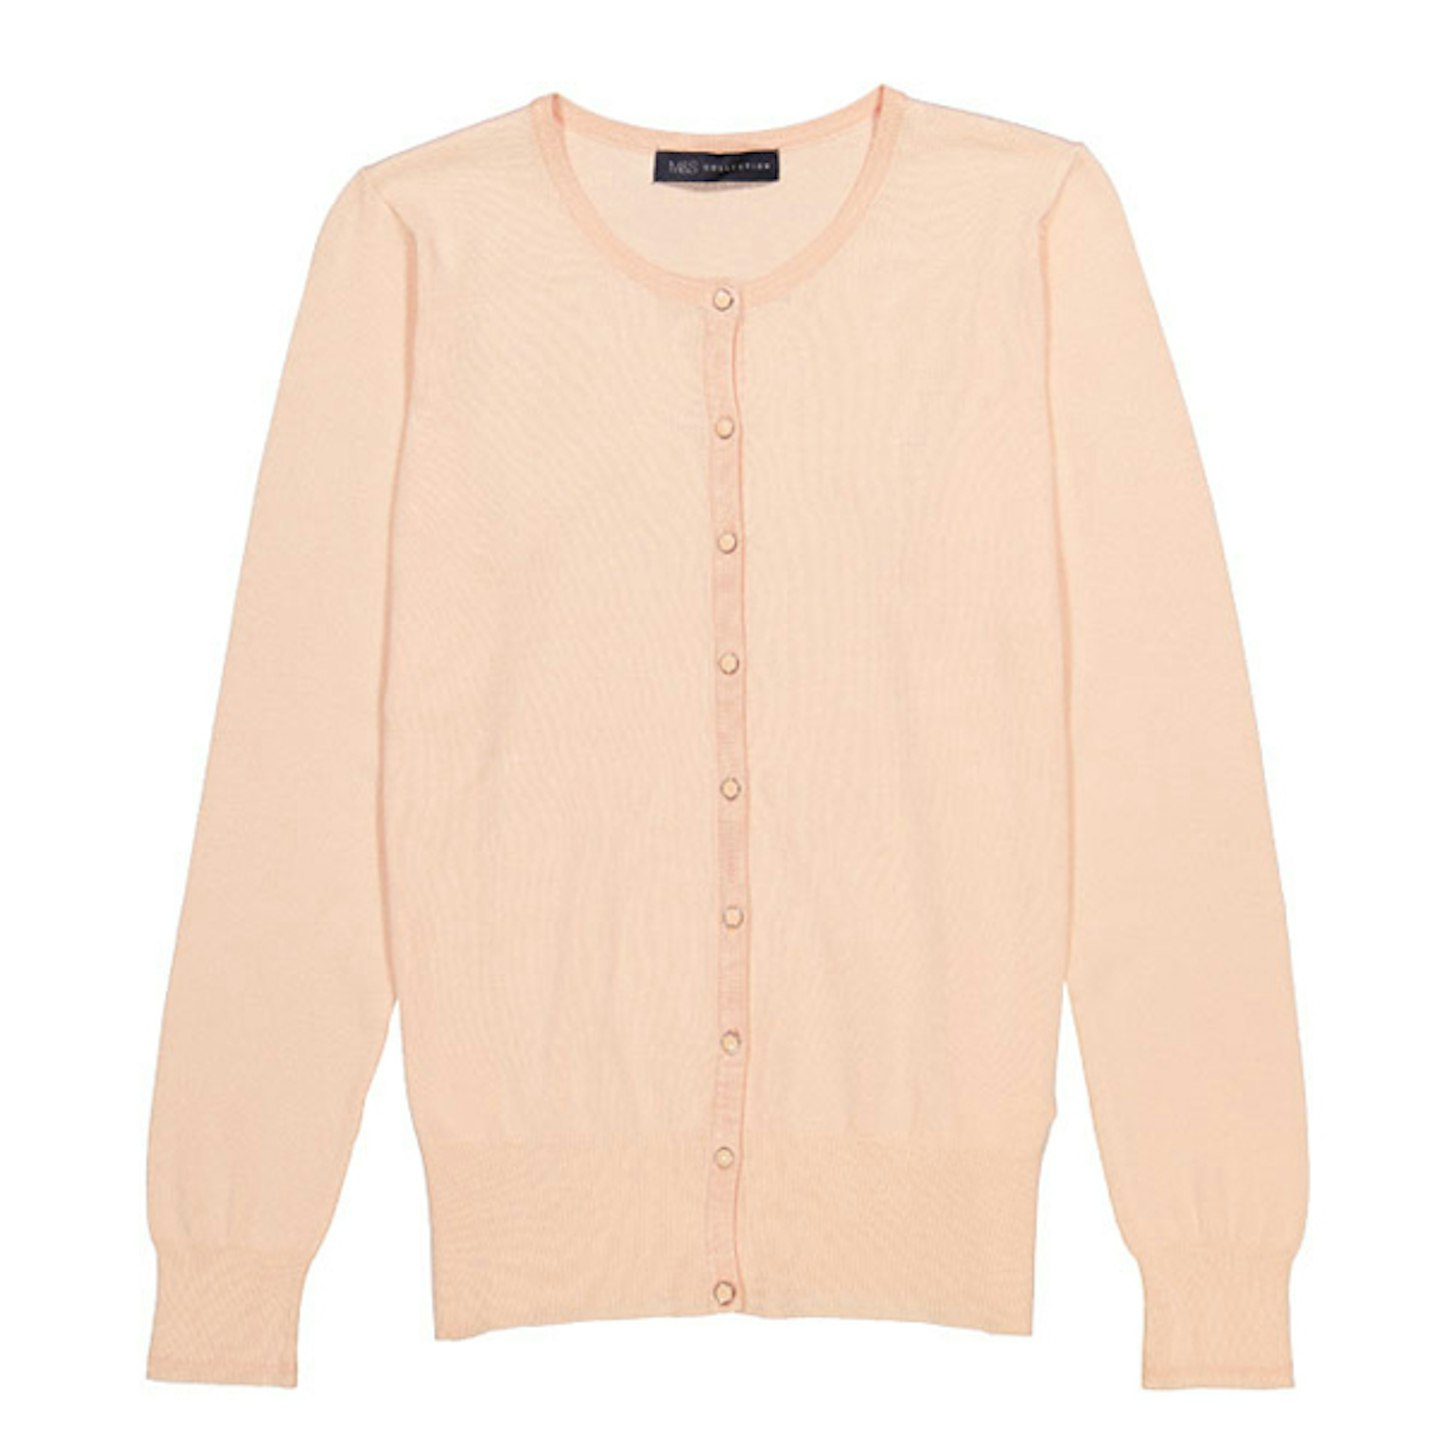 M&S pink cardigan for summer